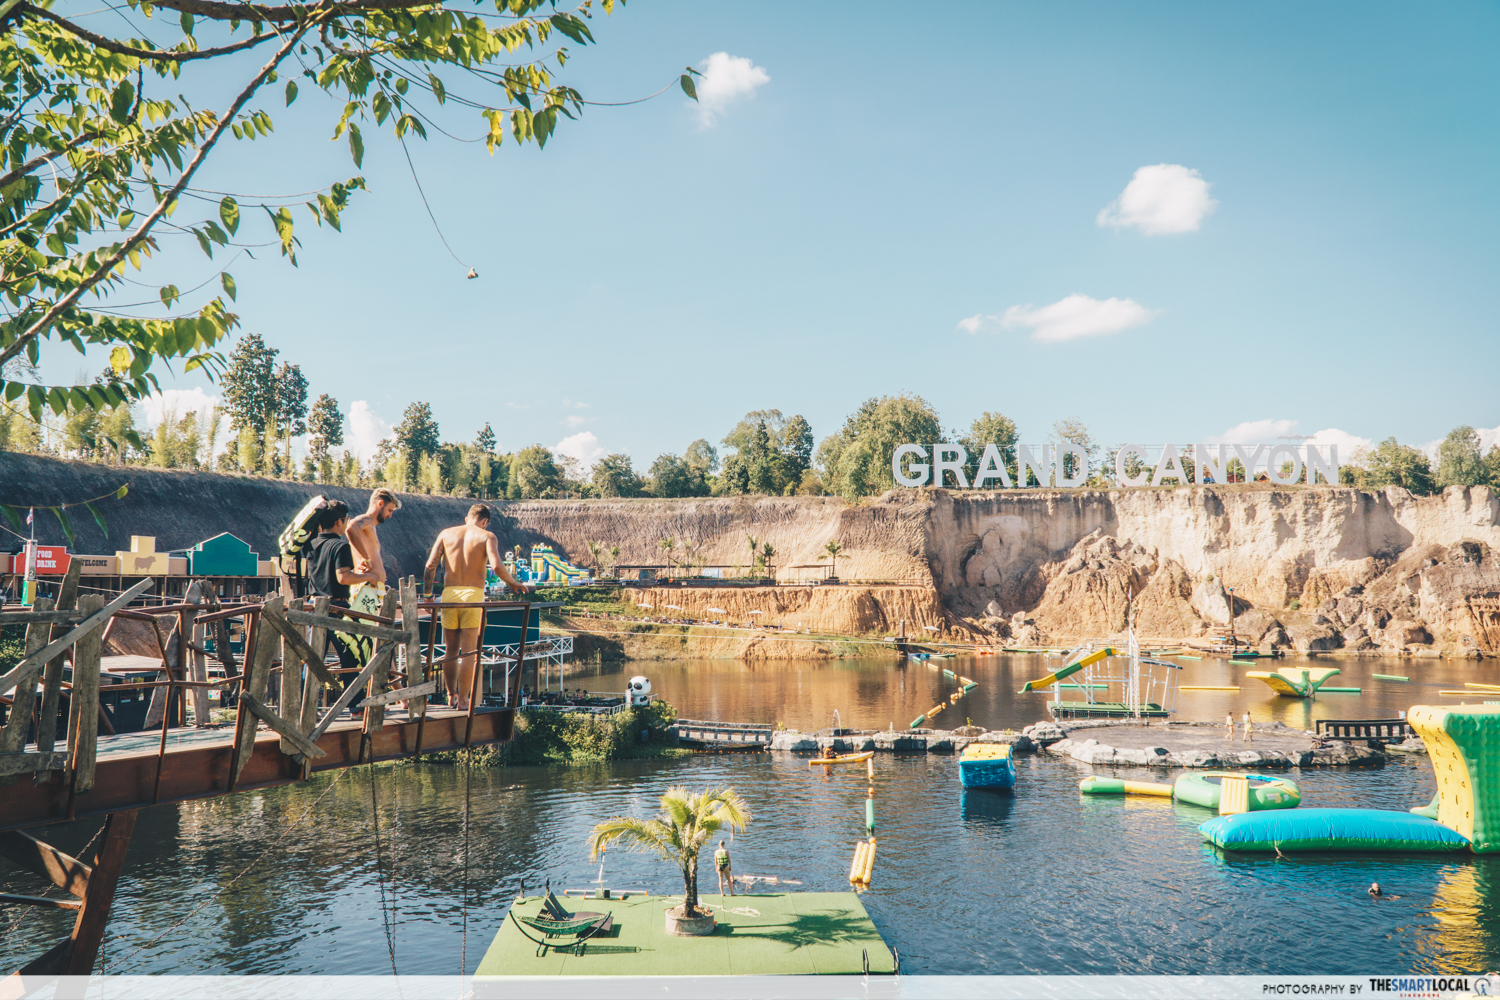 Grand Canyon Water Park - cliff jumping